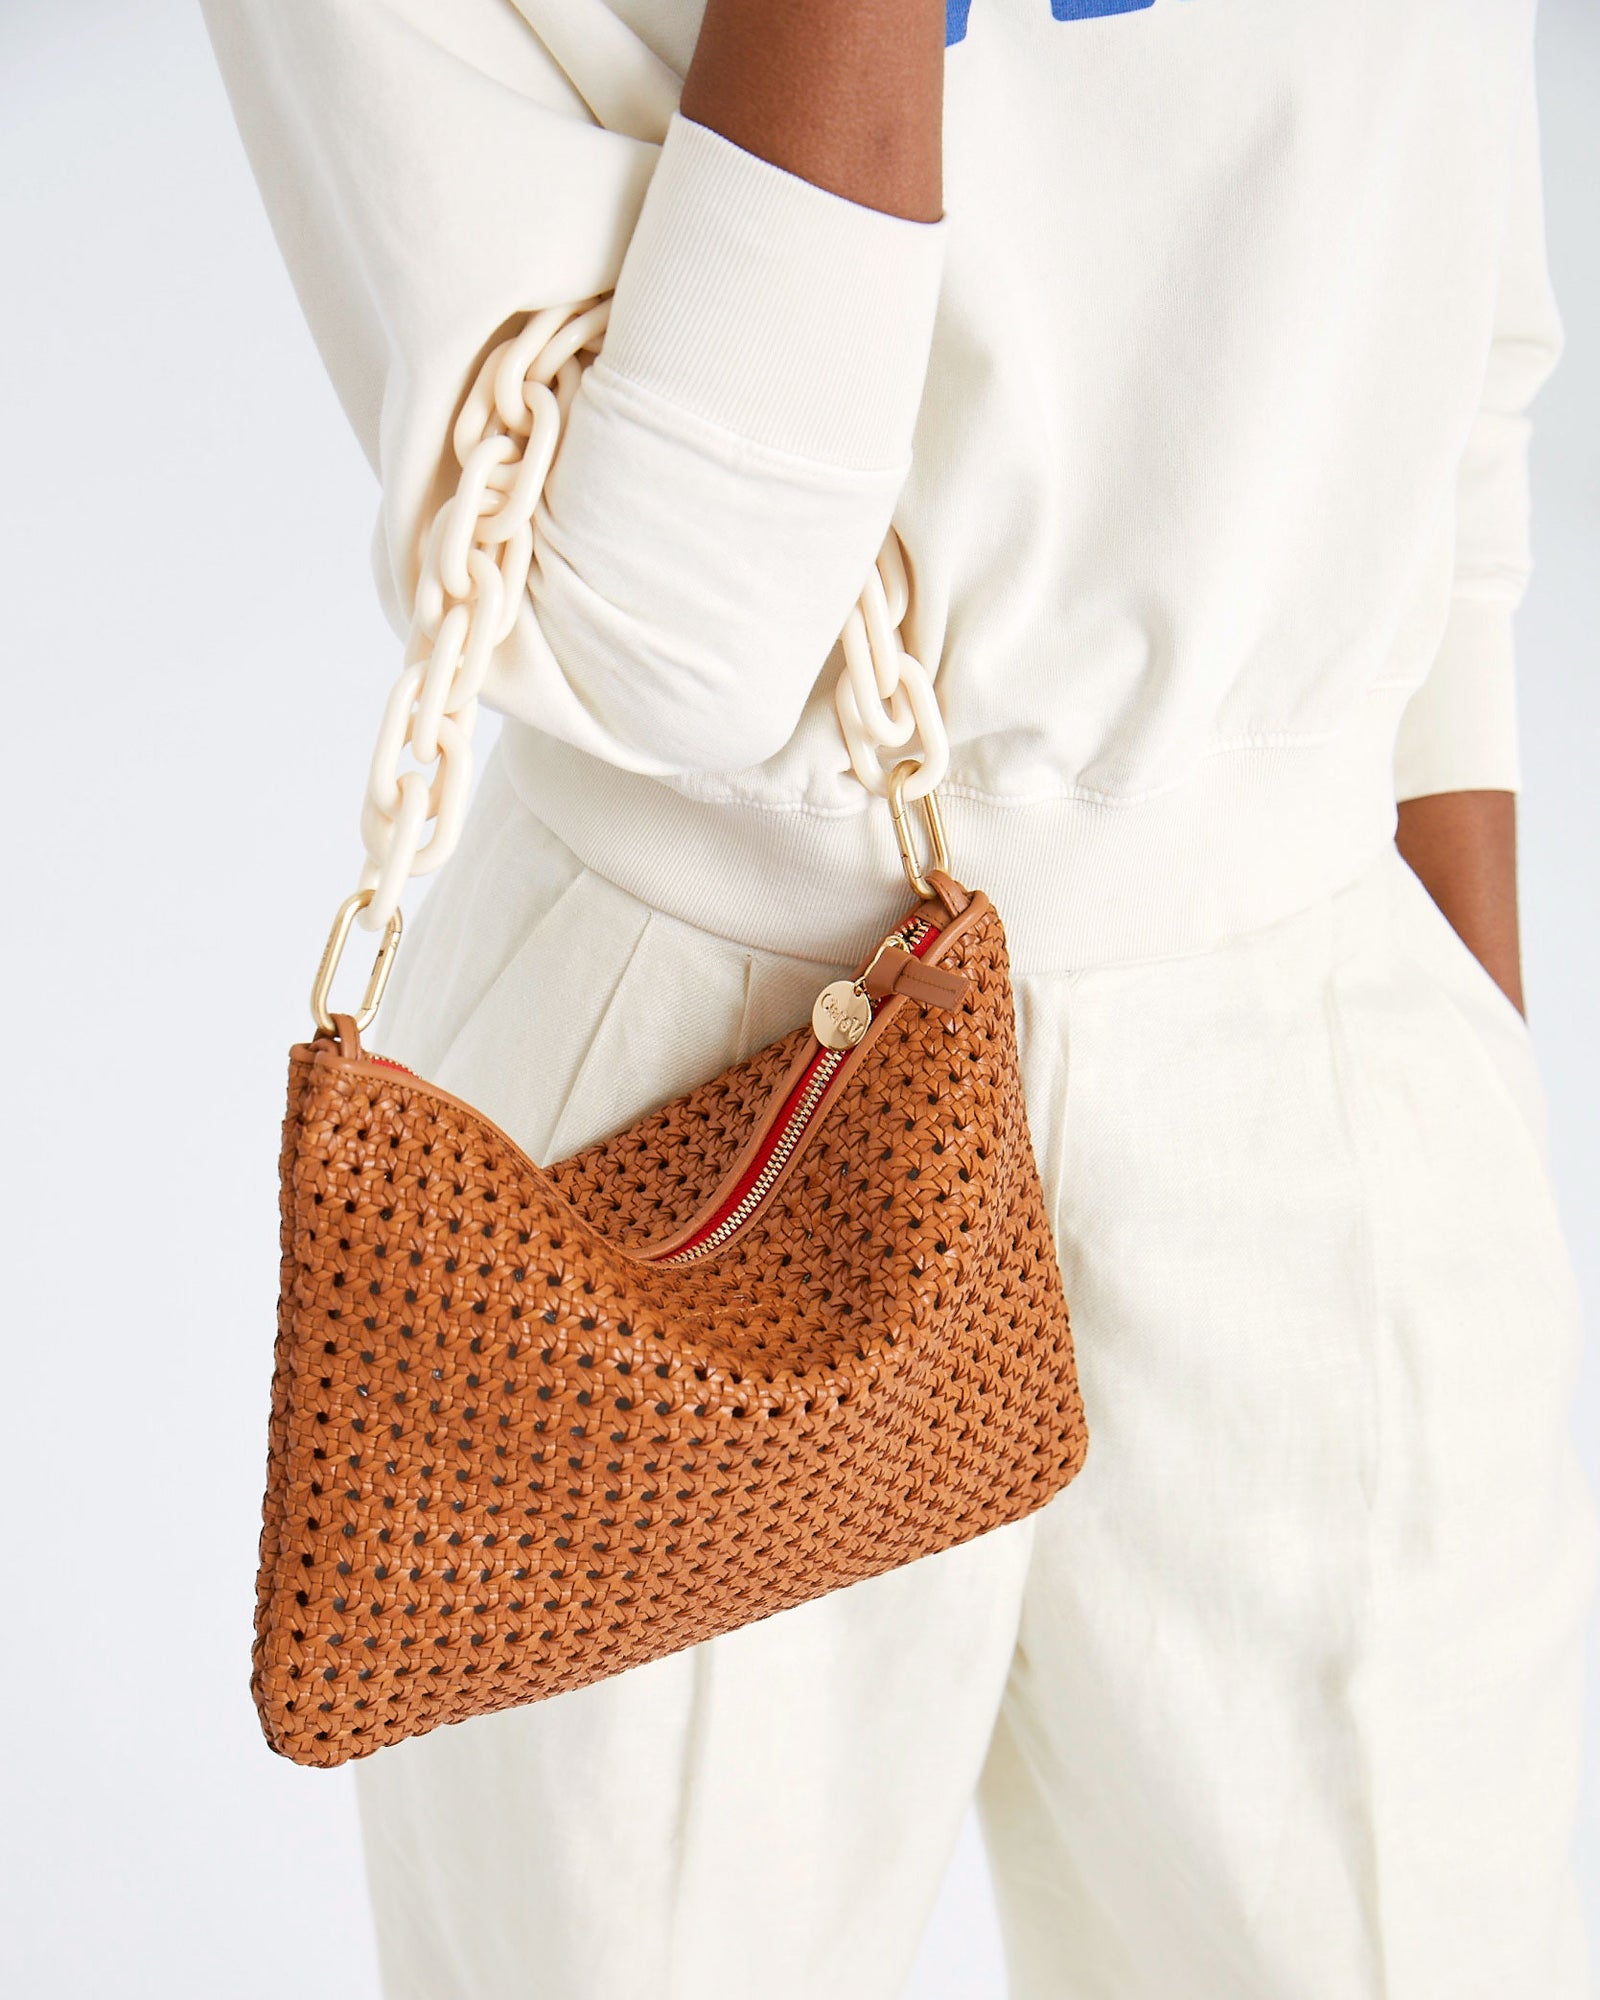 mecca carrying the Tan Rattan Flat Clutch w/ Tabs by the cream resin shortie strap